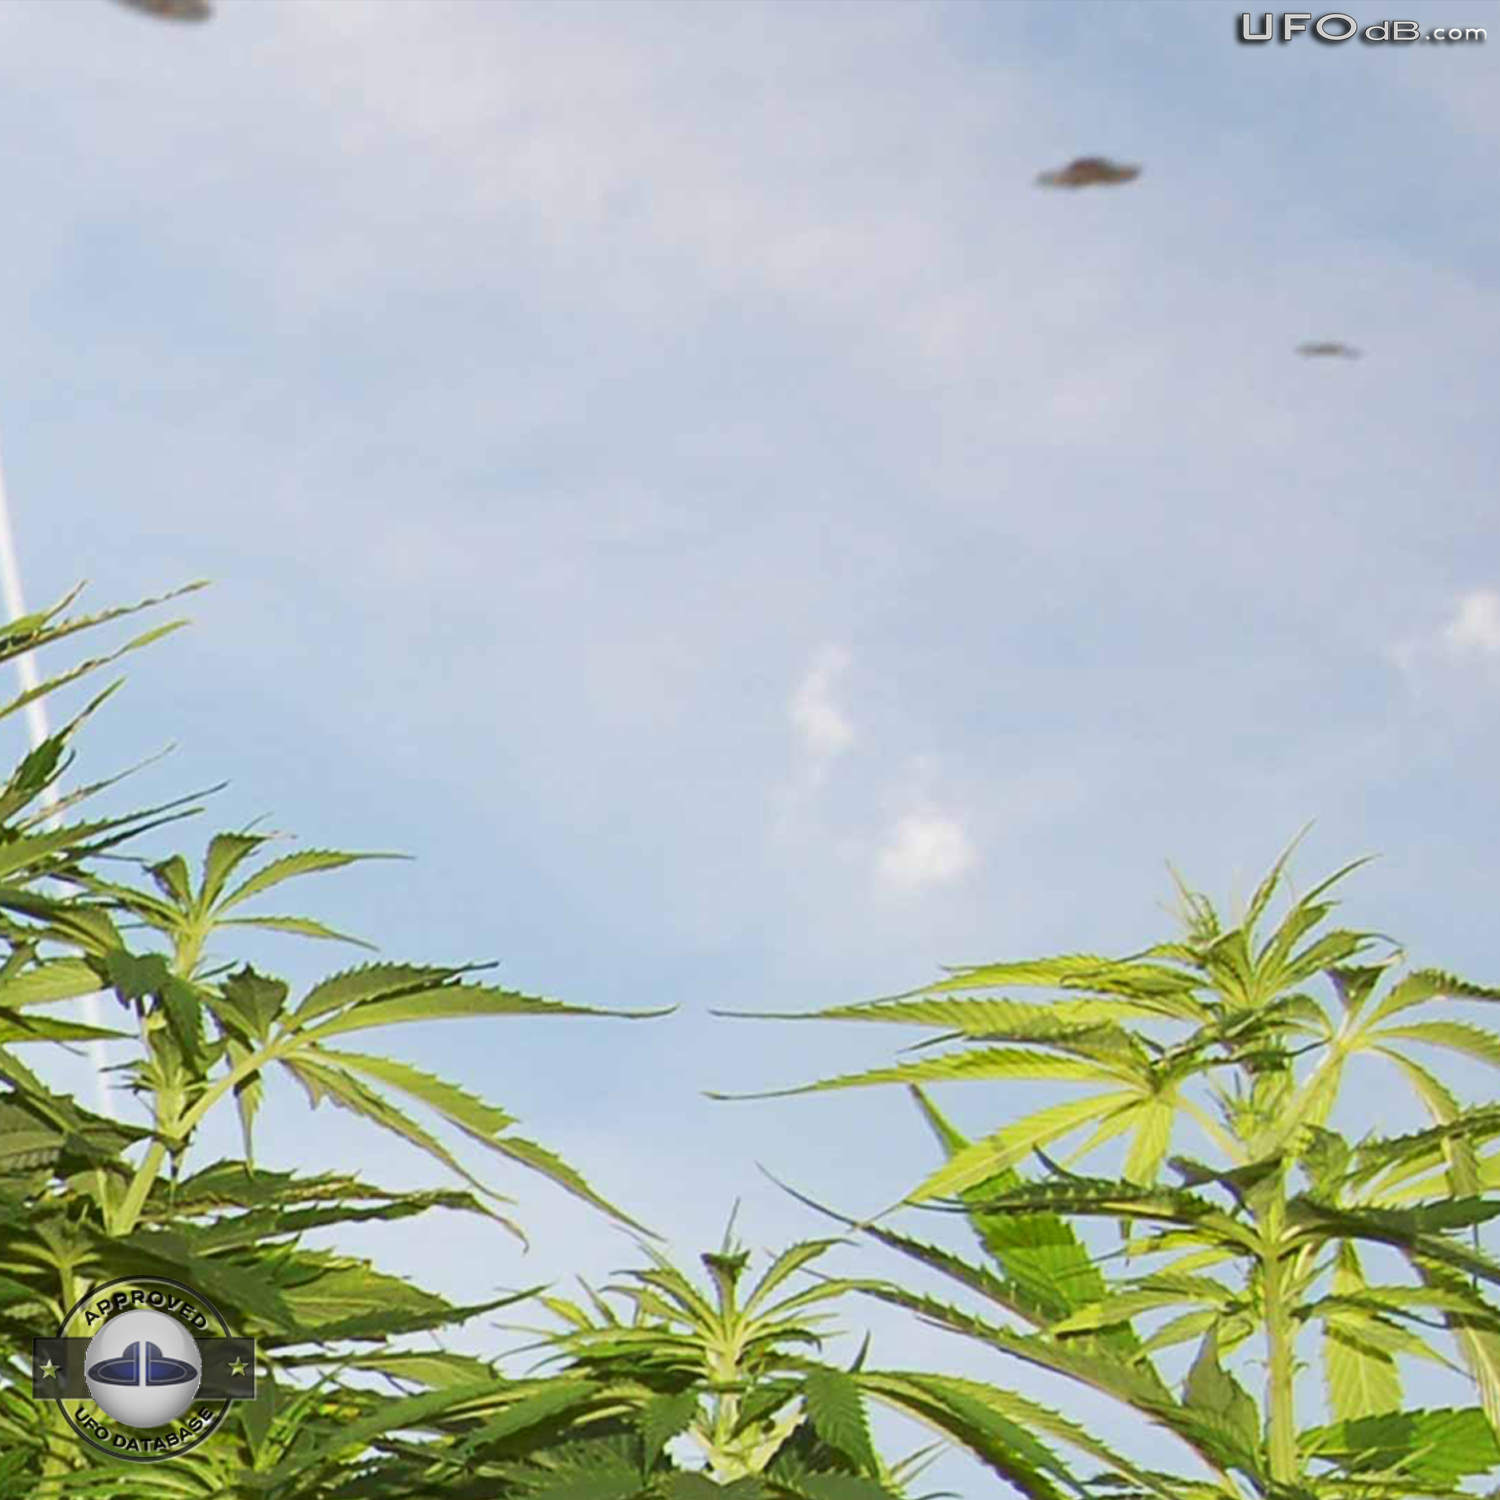 Amsterdam weed grower see three saucer UFOs passing in the sky UFO Picture #366-3